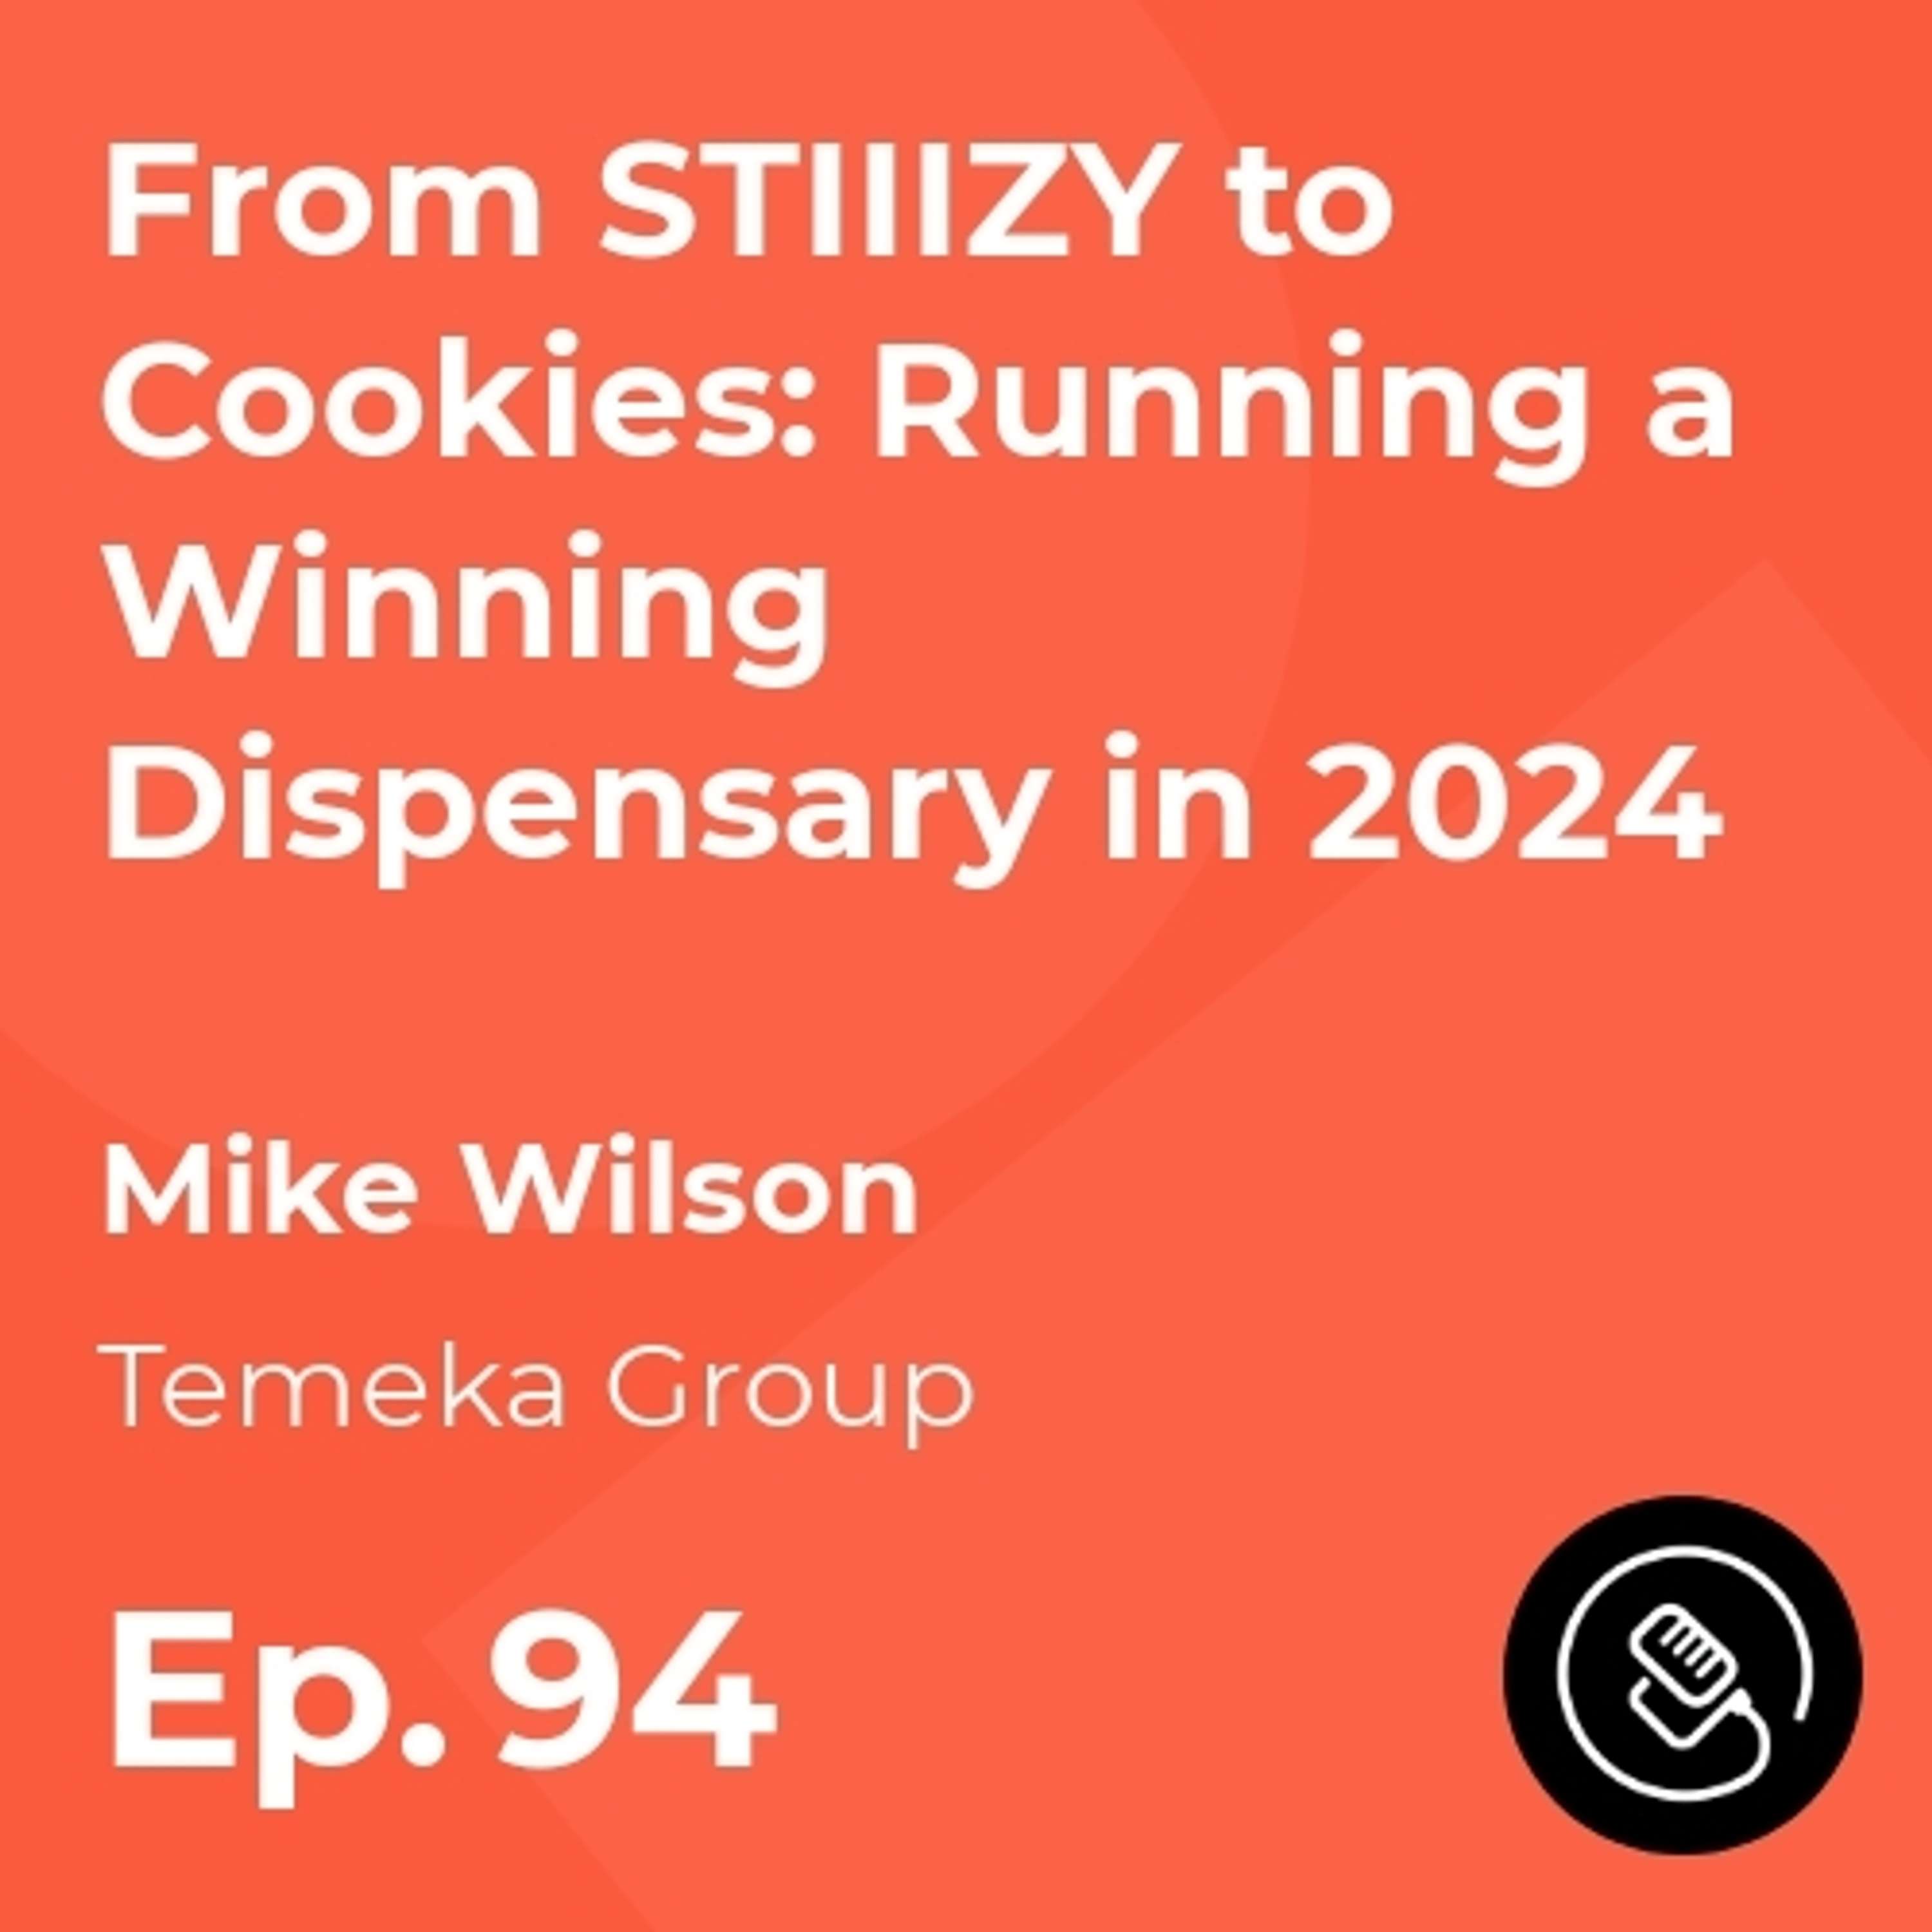 From STIIIZY to Cookies: Running a Winning Dispensary in 2024